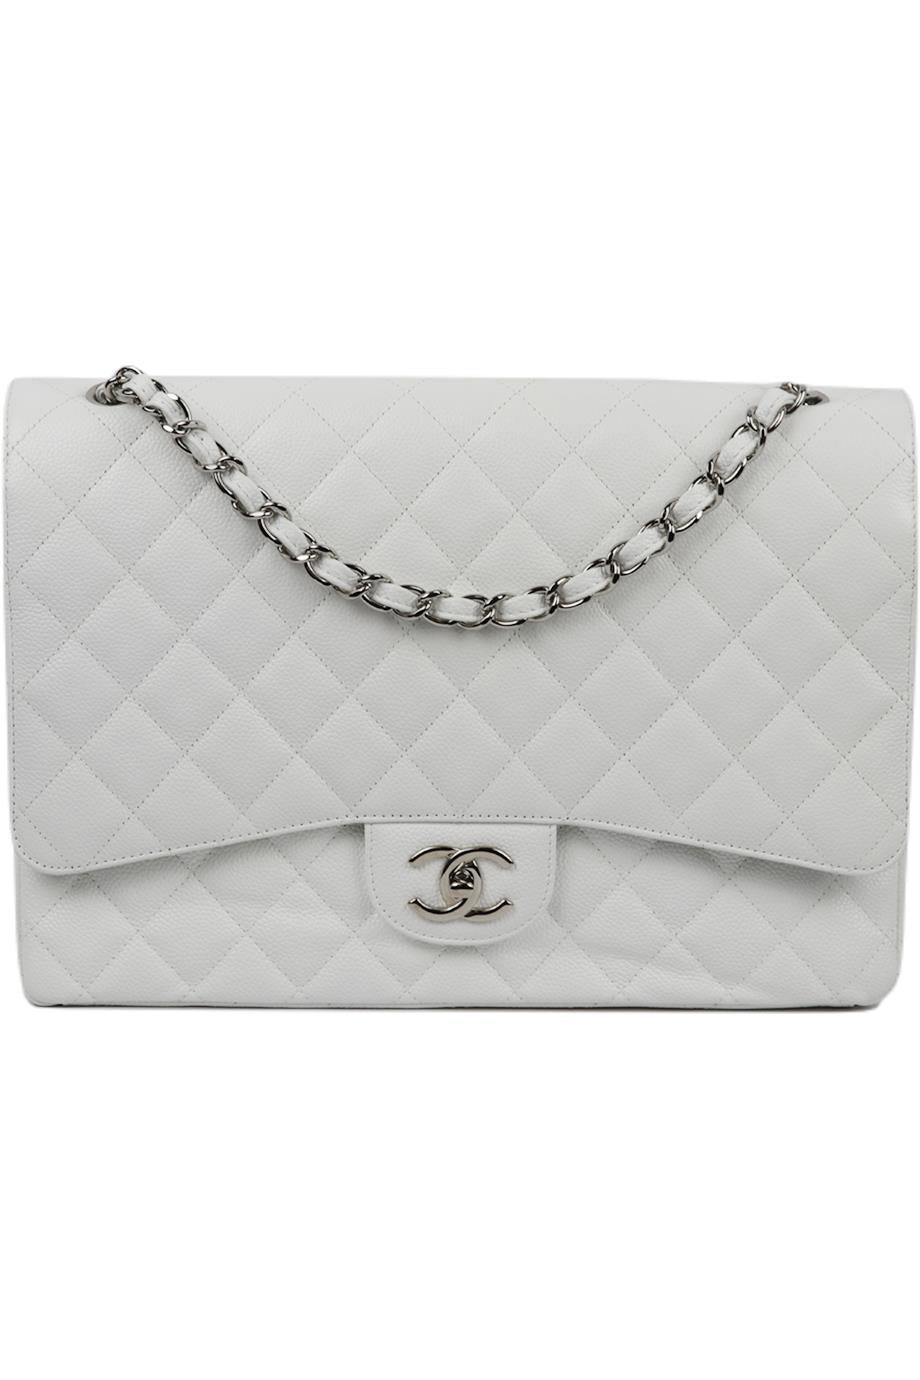 CHANEL 2011 MAXI CLASSIC QUILTED CAVIAR LEATHER DOUBLE FLAP SHOULDER BAG